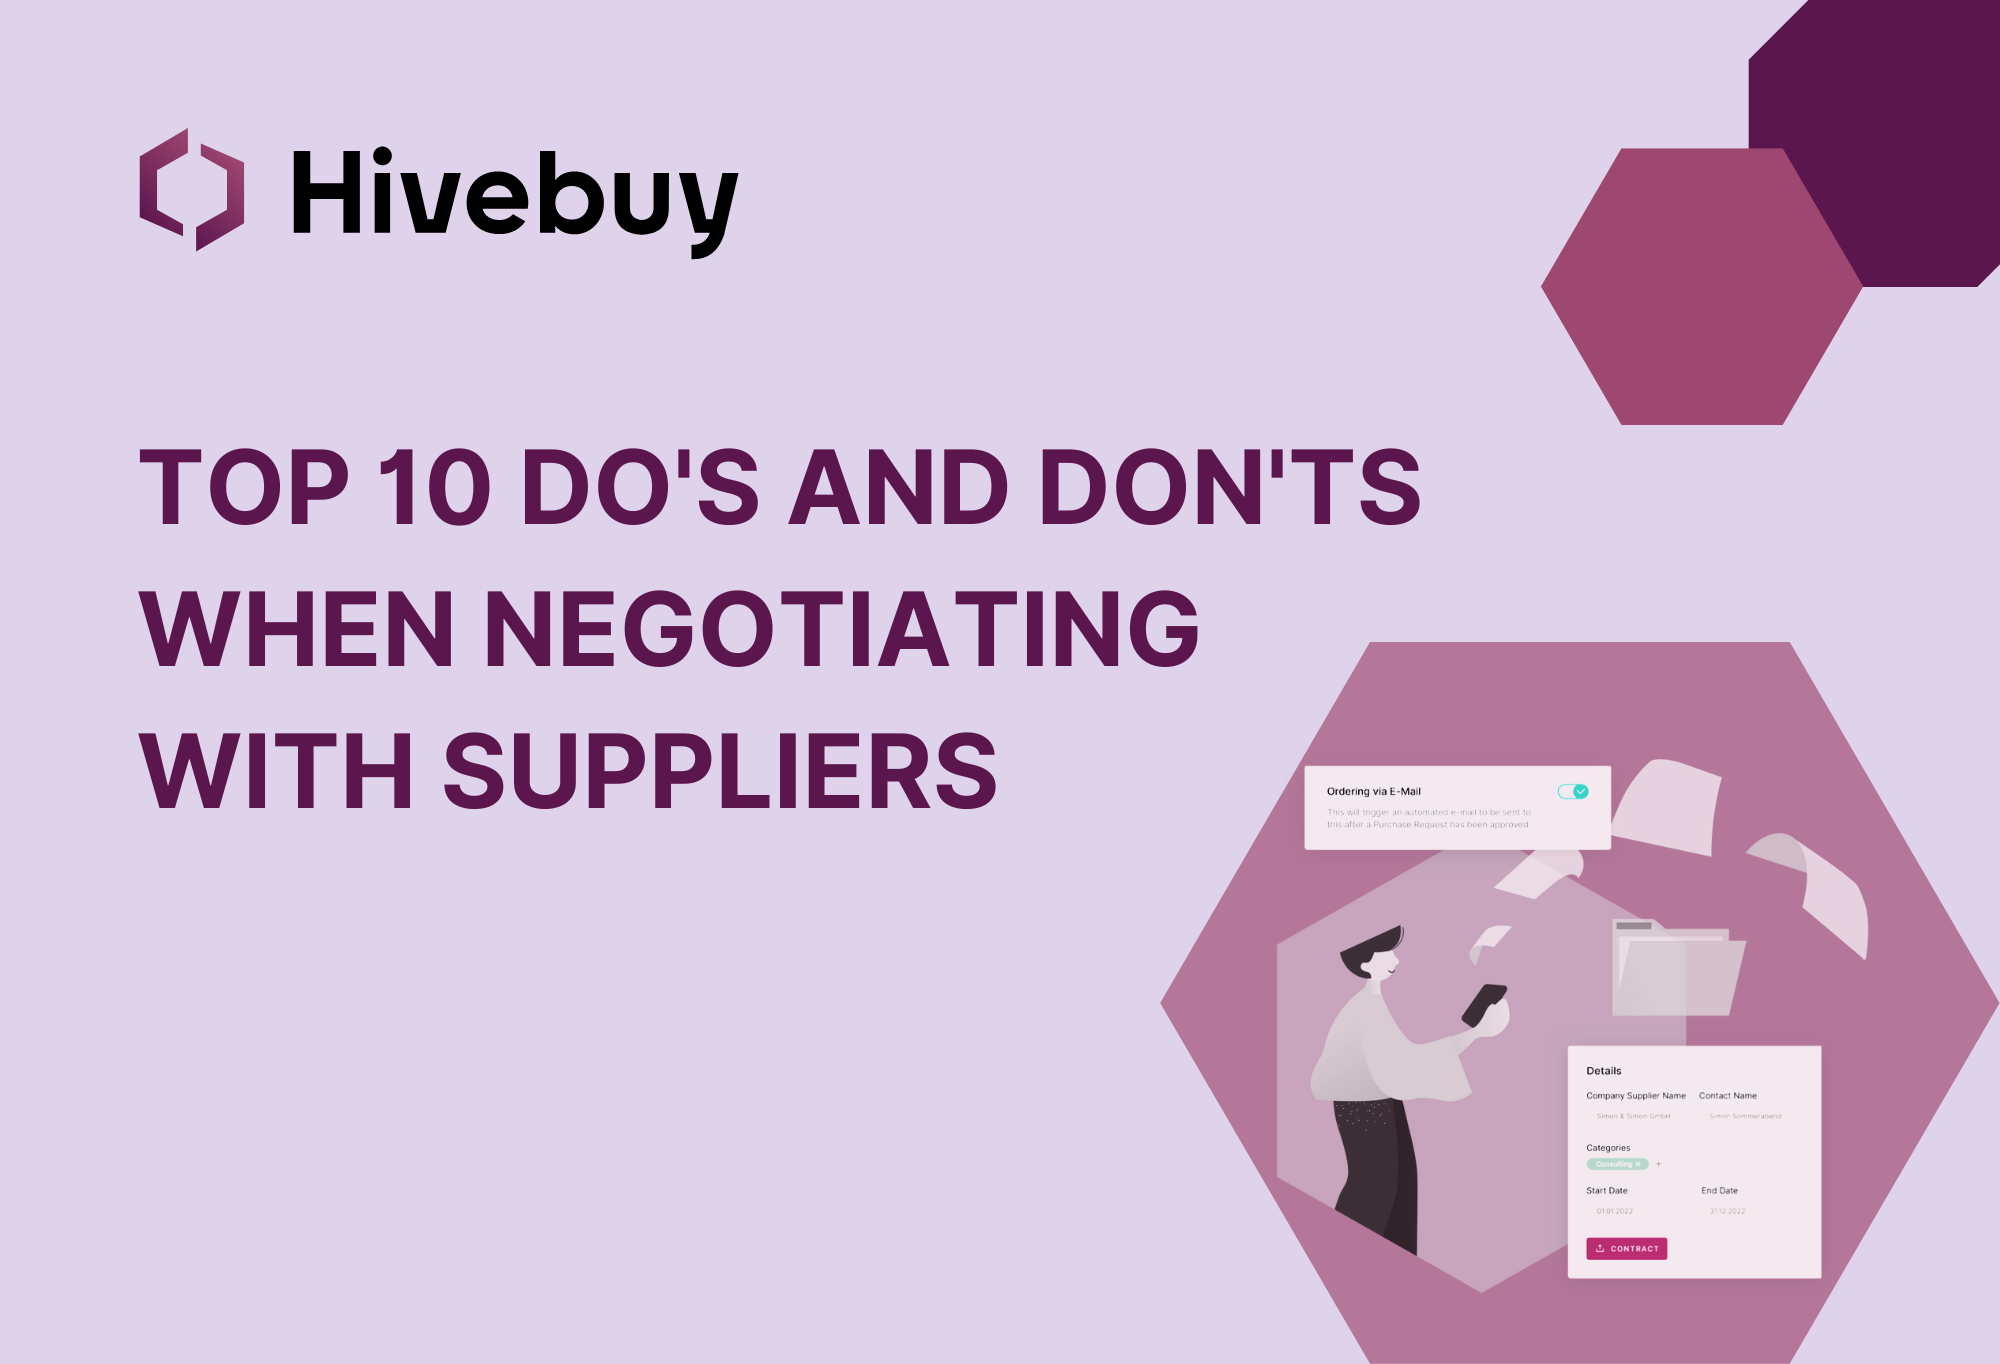 Top 10 Do’s and Don’ts when negotiating with suppliers